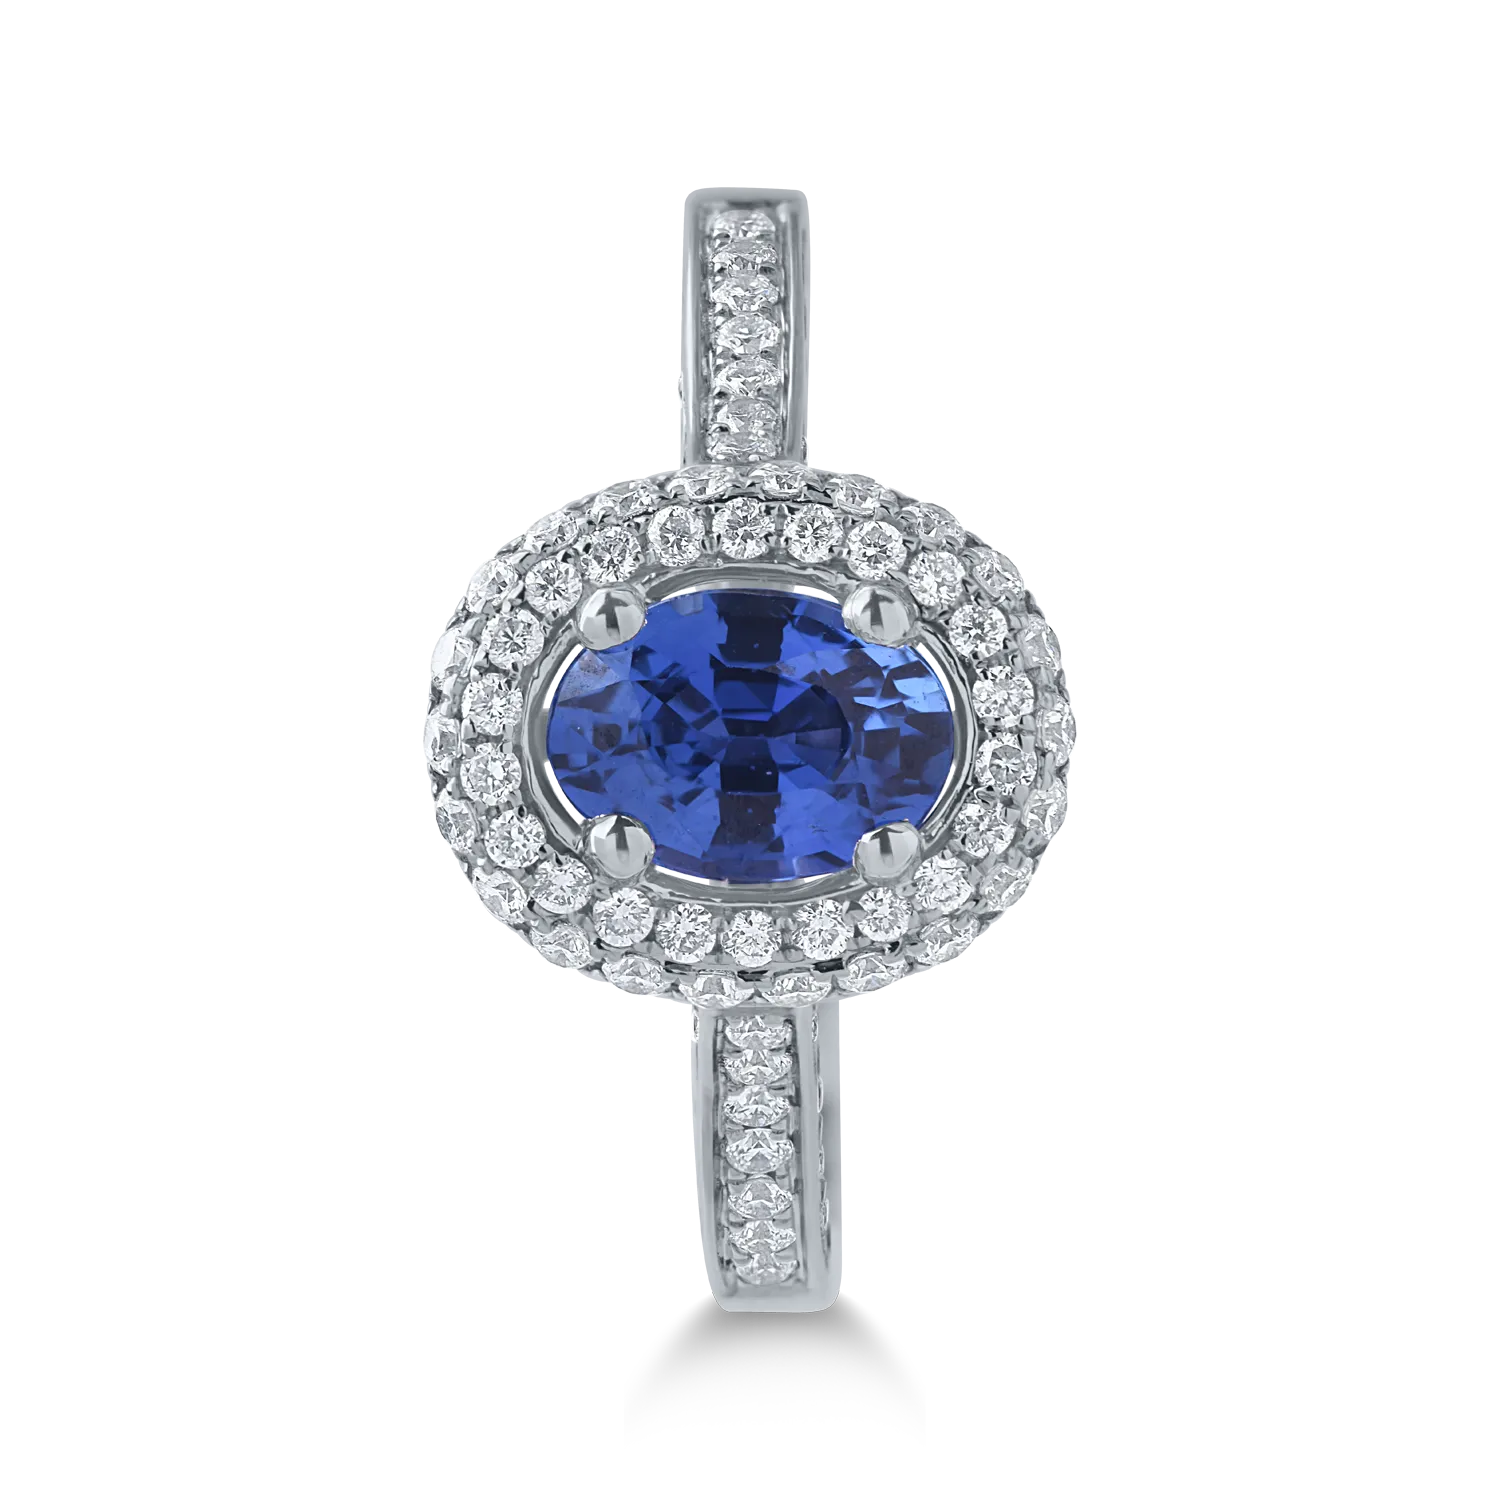 White gold ring with 1.16ct sapphire and 0.56ct diamonds